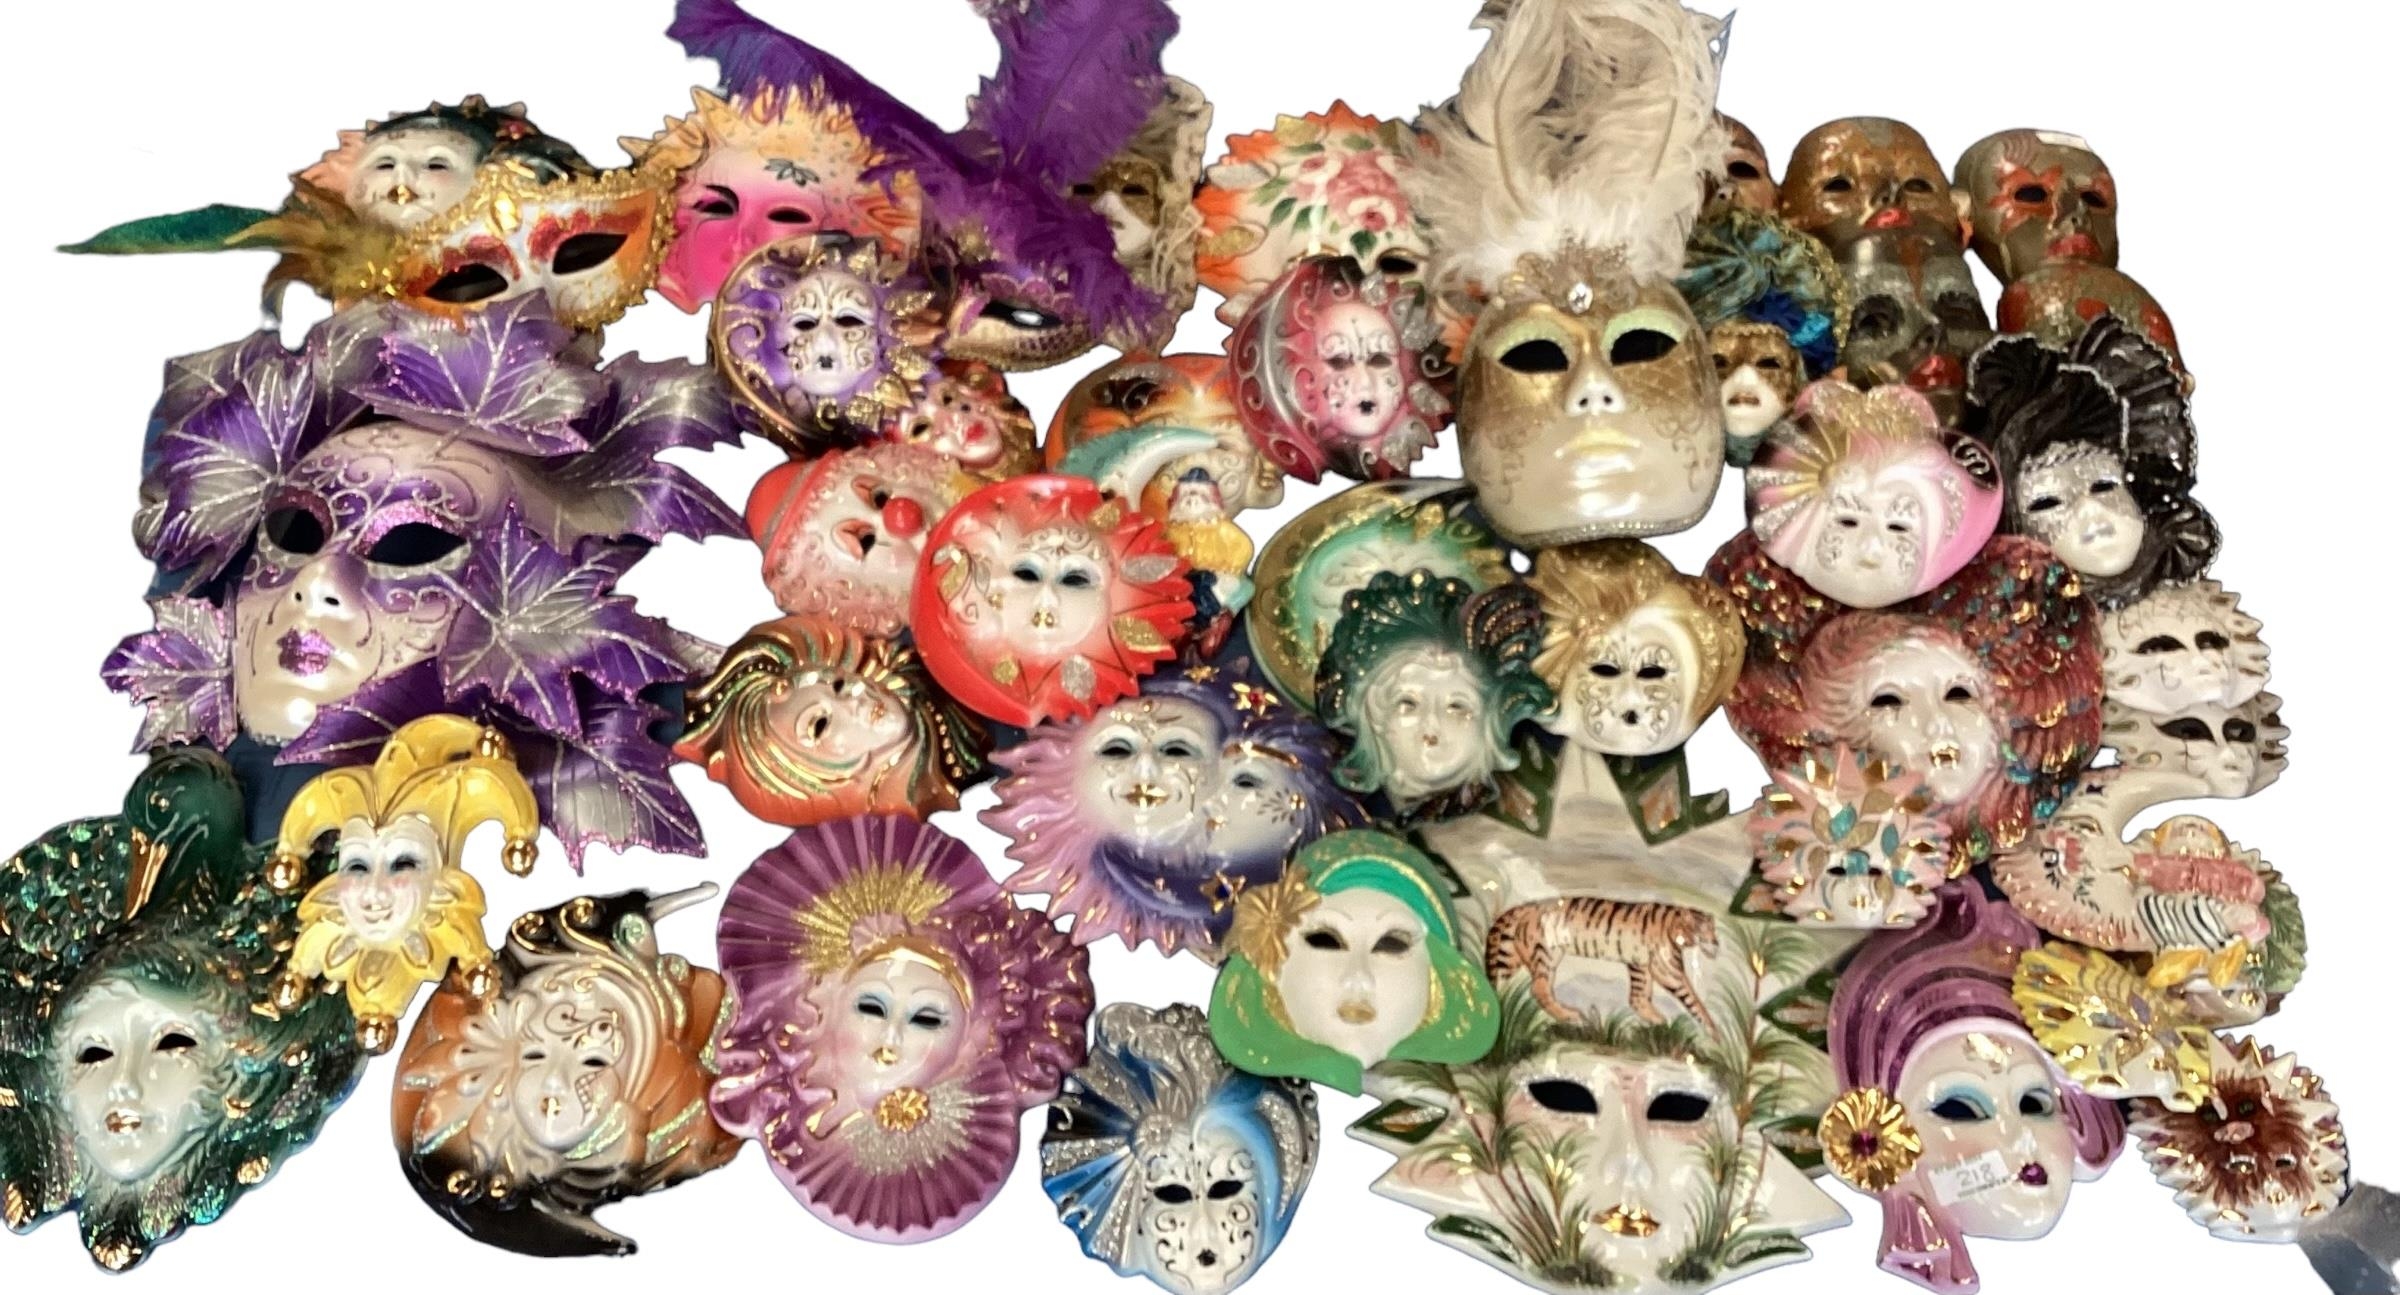 Approx 50 Venetian style masks, see images for details